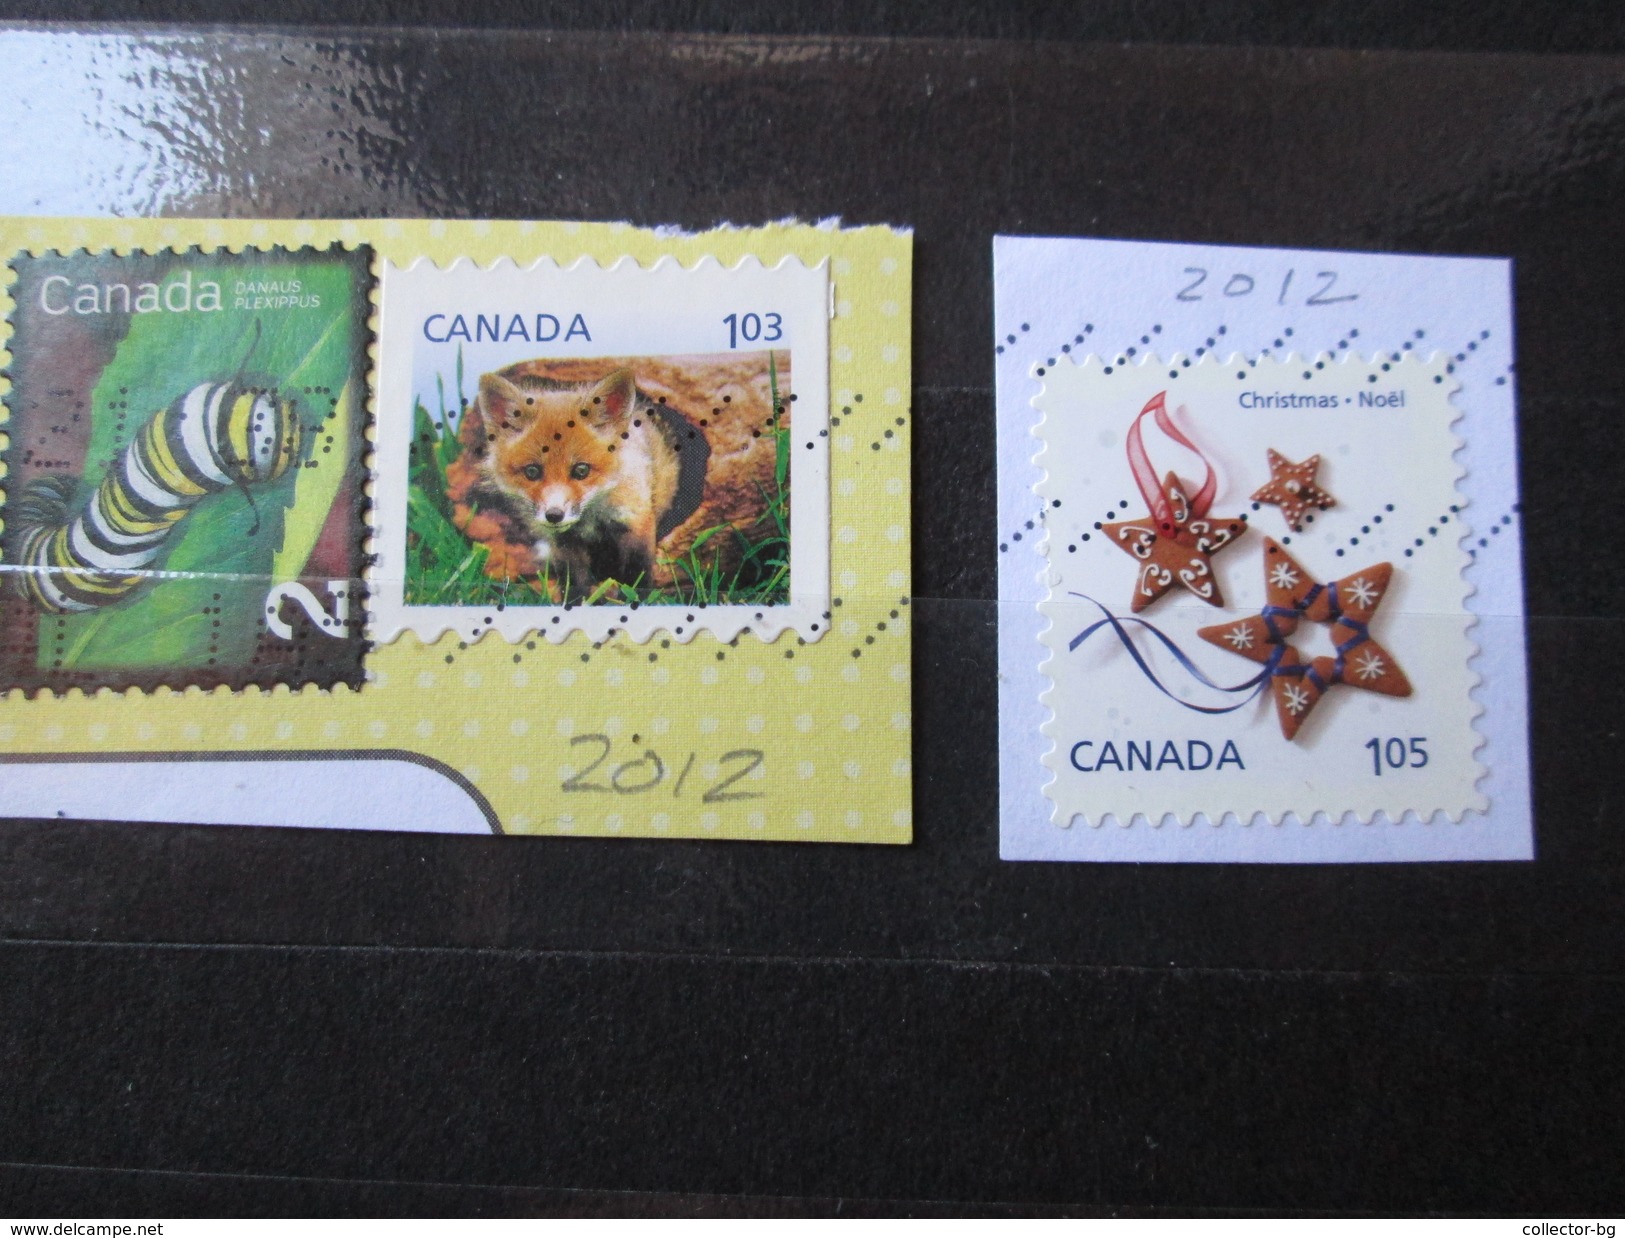 RARE CANADA 2+1.05+1.03 CENTS DANAUS+FOX+ CHRITMAS NOEL 2012 TRAVEL  STAMP TIMBRE - Airmail: Special Delivery